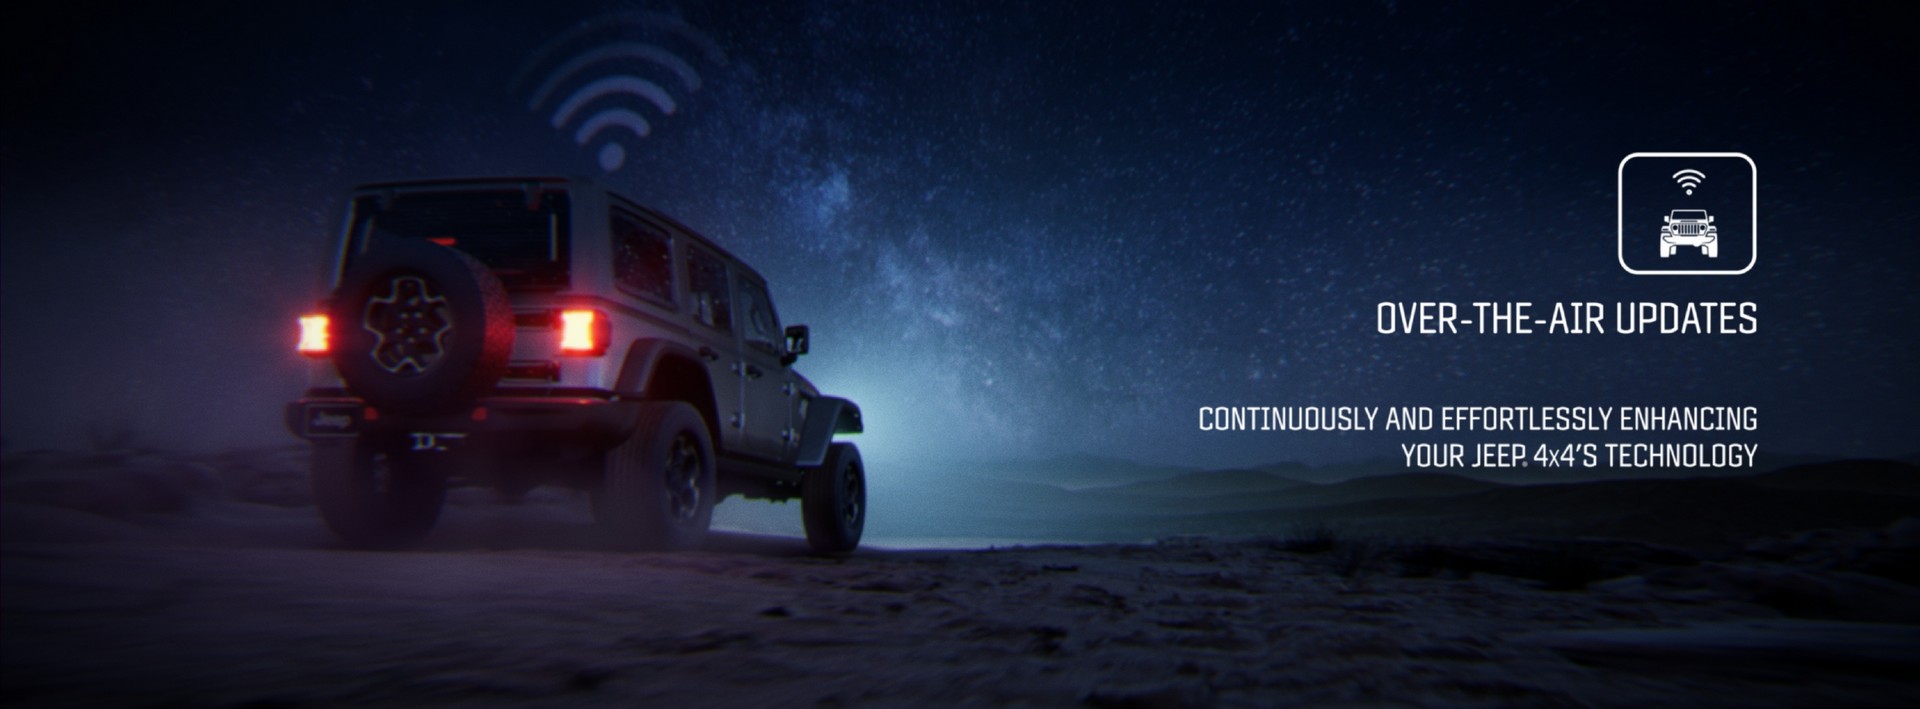 Jeep-Freedom-Connected-2.jpg